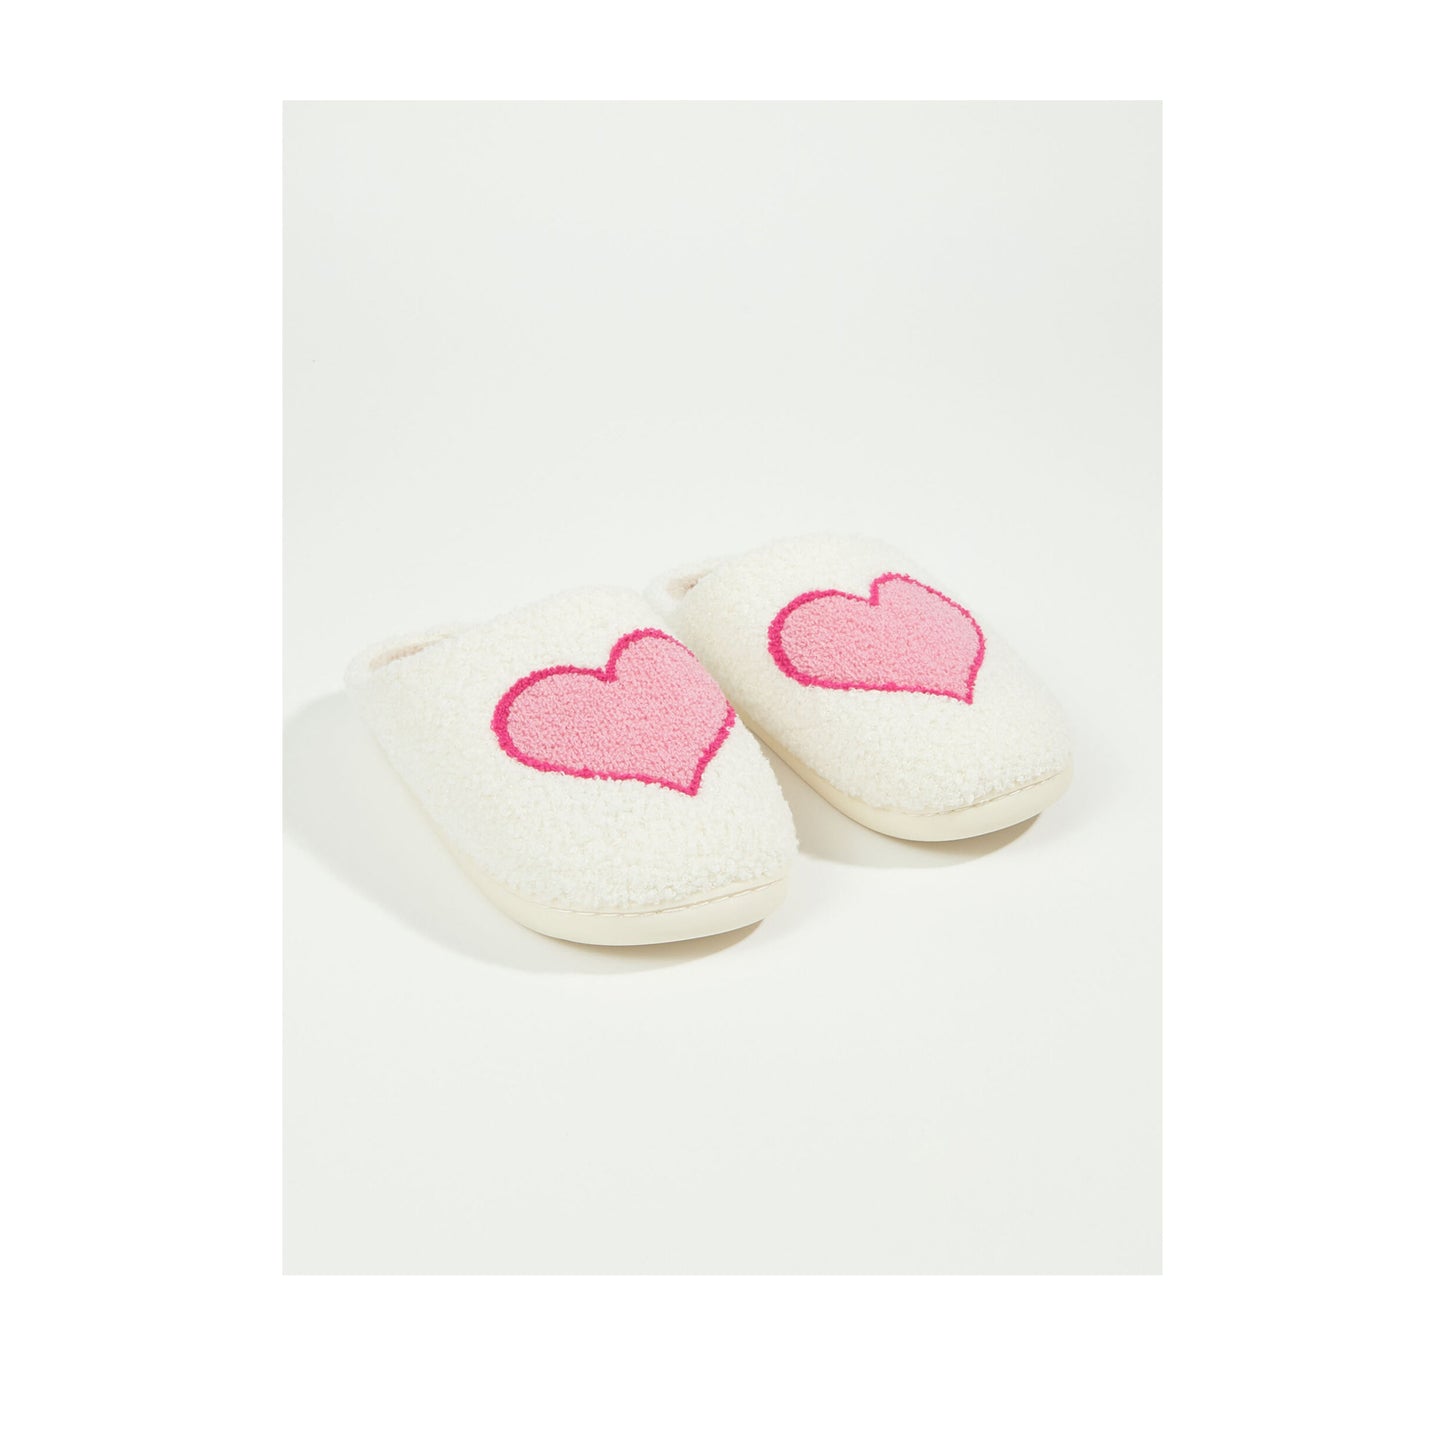 FLOOF Retro Heart Slippers in Pink/Red